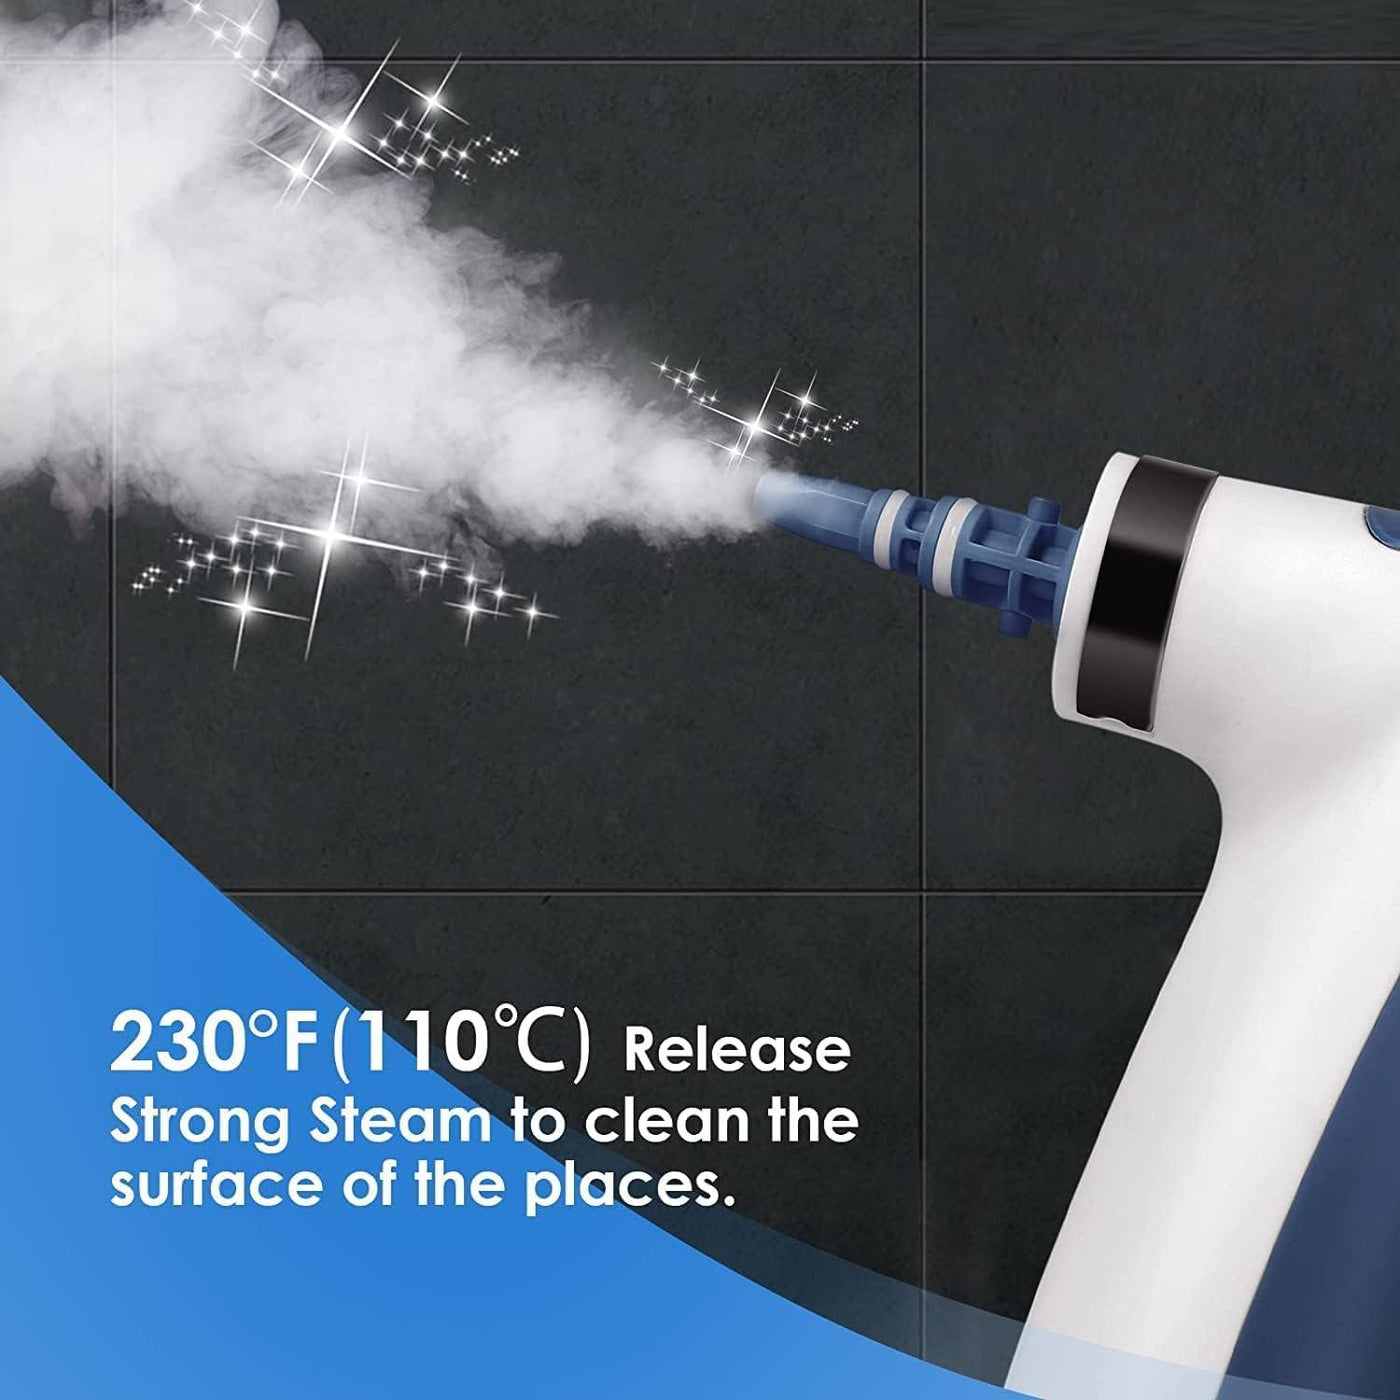 Handheld Steam Cleaner Pressurized Multi-Surface with 9 Accessories - Massive Discounts